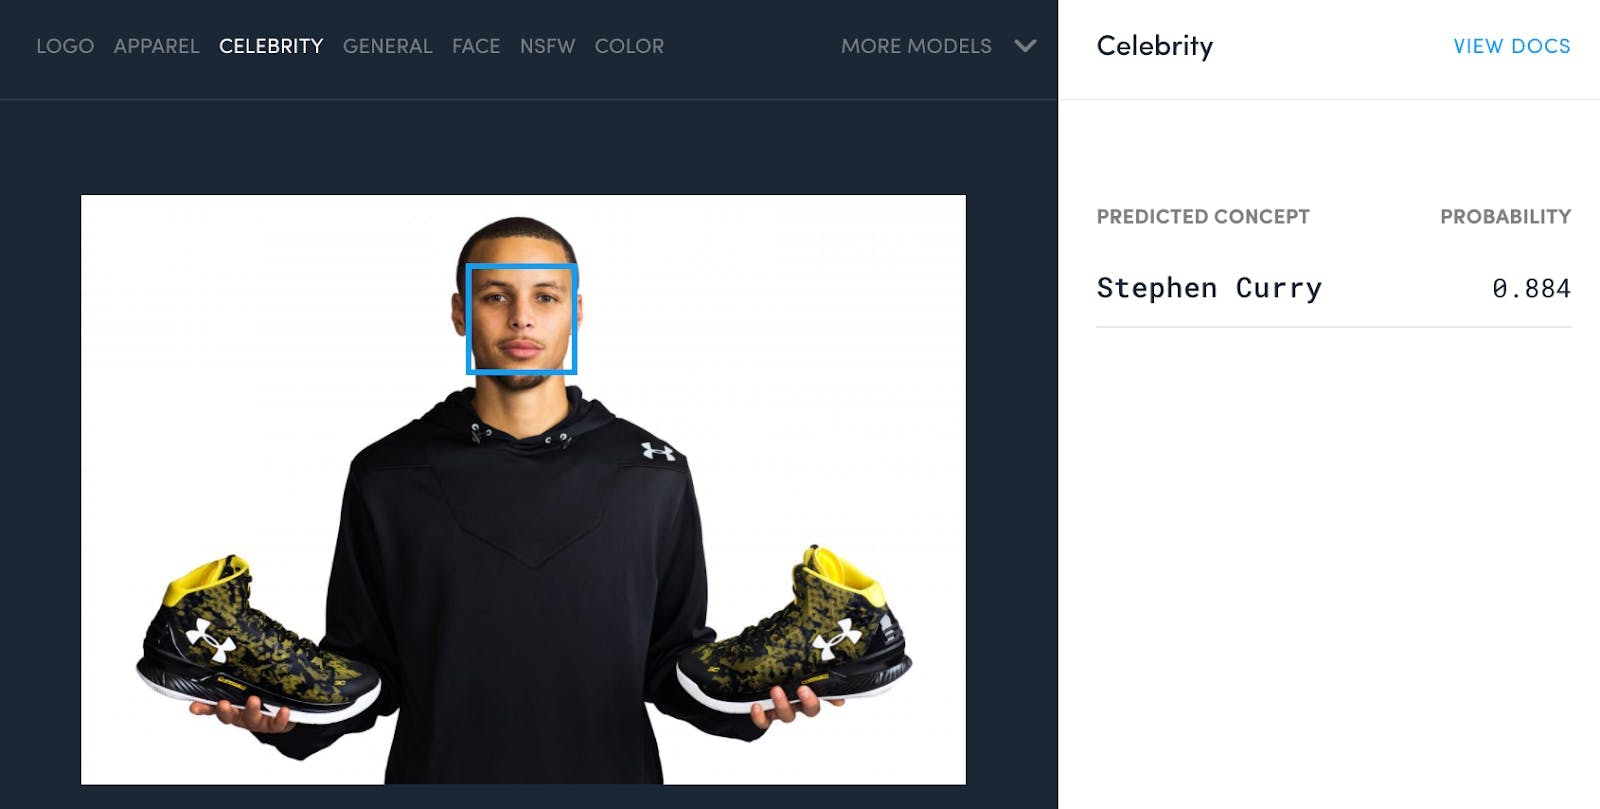 Stephen Curry holding a pair of sneakers